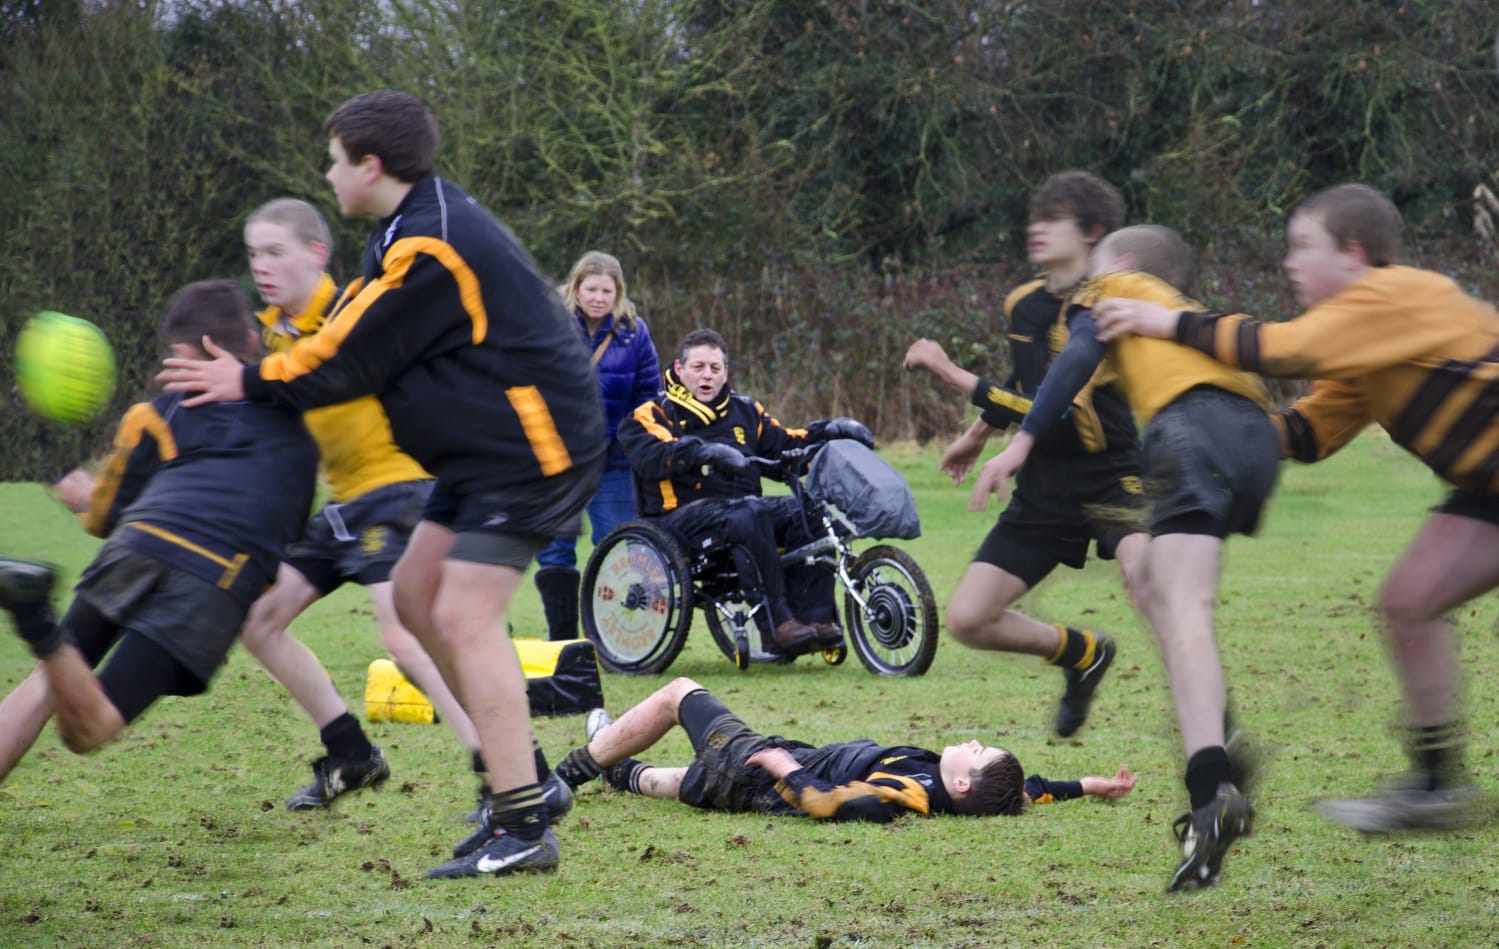 Tim, in his Tri-Ride wheelchair, watching his young son play junior rugby